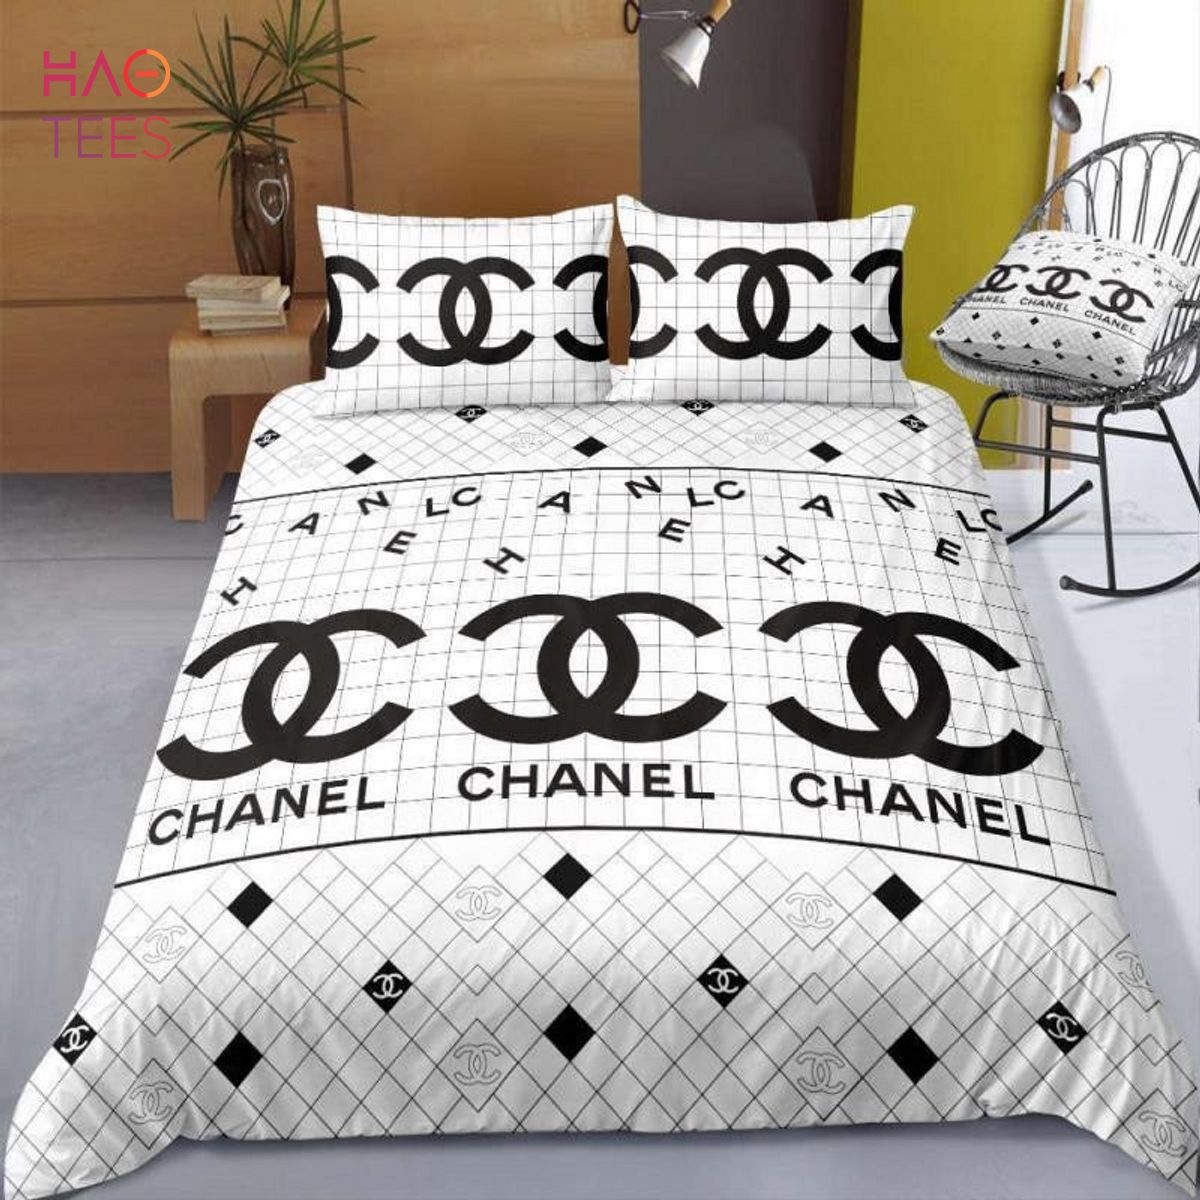 THE BEST] Chanel Luxury Brand Inspired 3D Personalized Customized Bedding  Sets